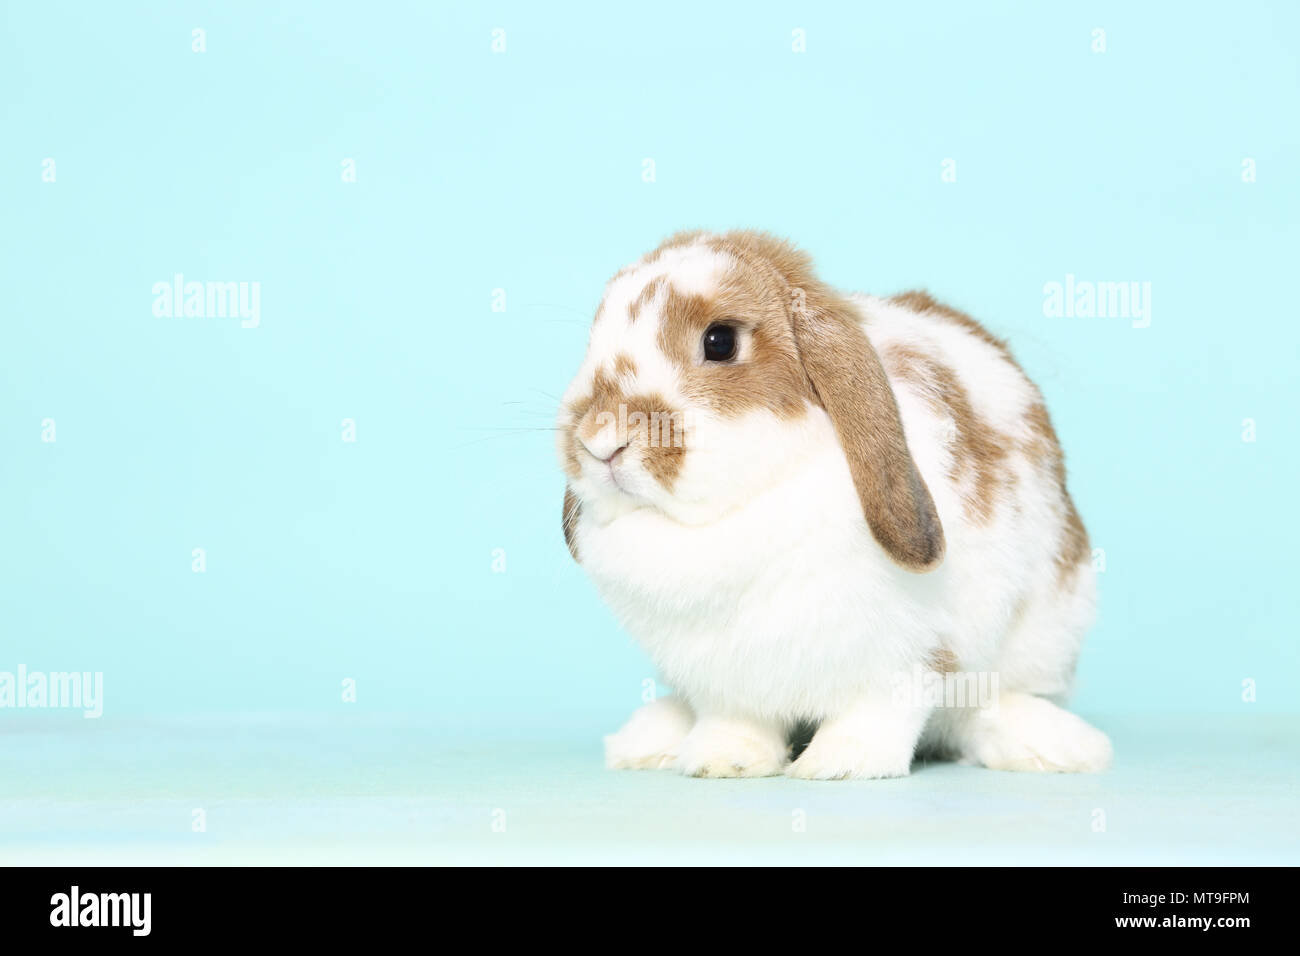 Dwarf Lop-eared Rabbit sitting. Studio picture against a light blue background Stock Photo